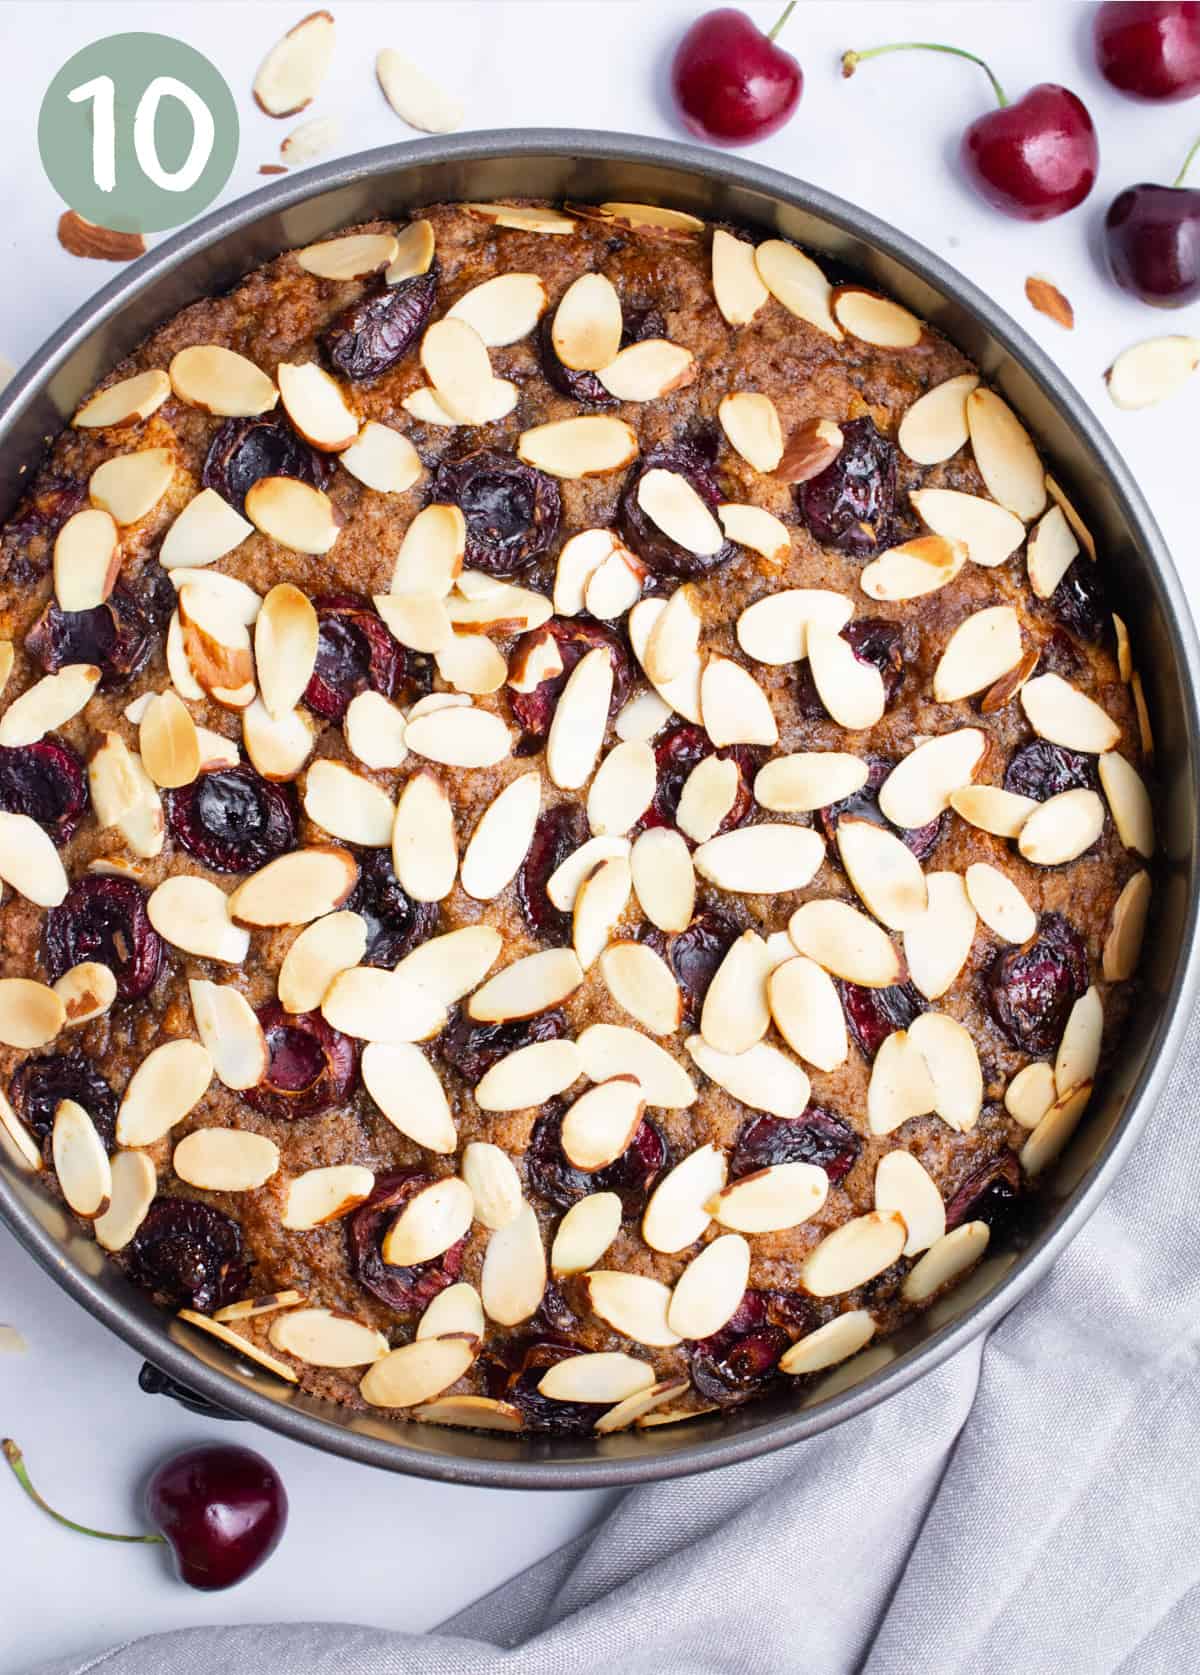 Vegan cherry coffee cake in a springform pan topped with halved cherries and sliced almonds after baking.